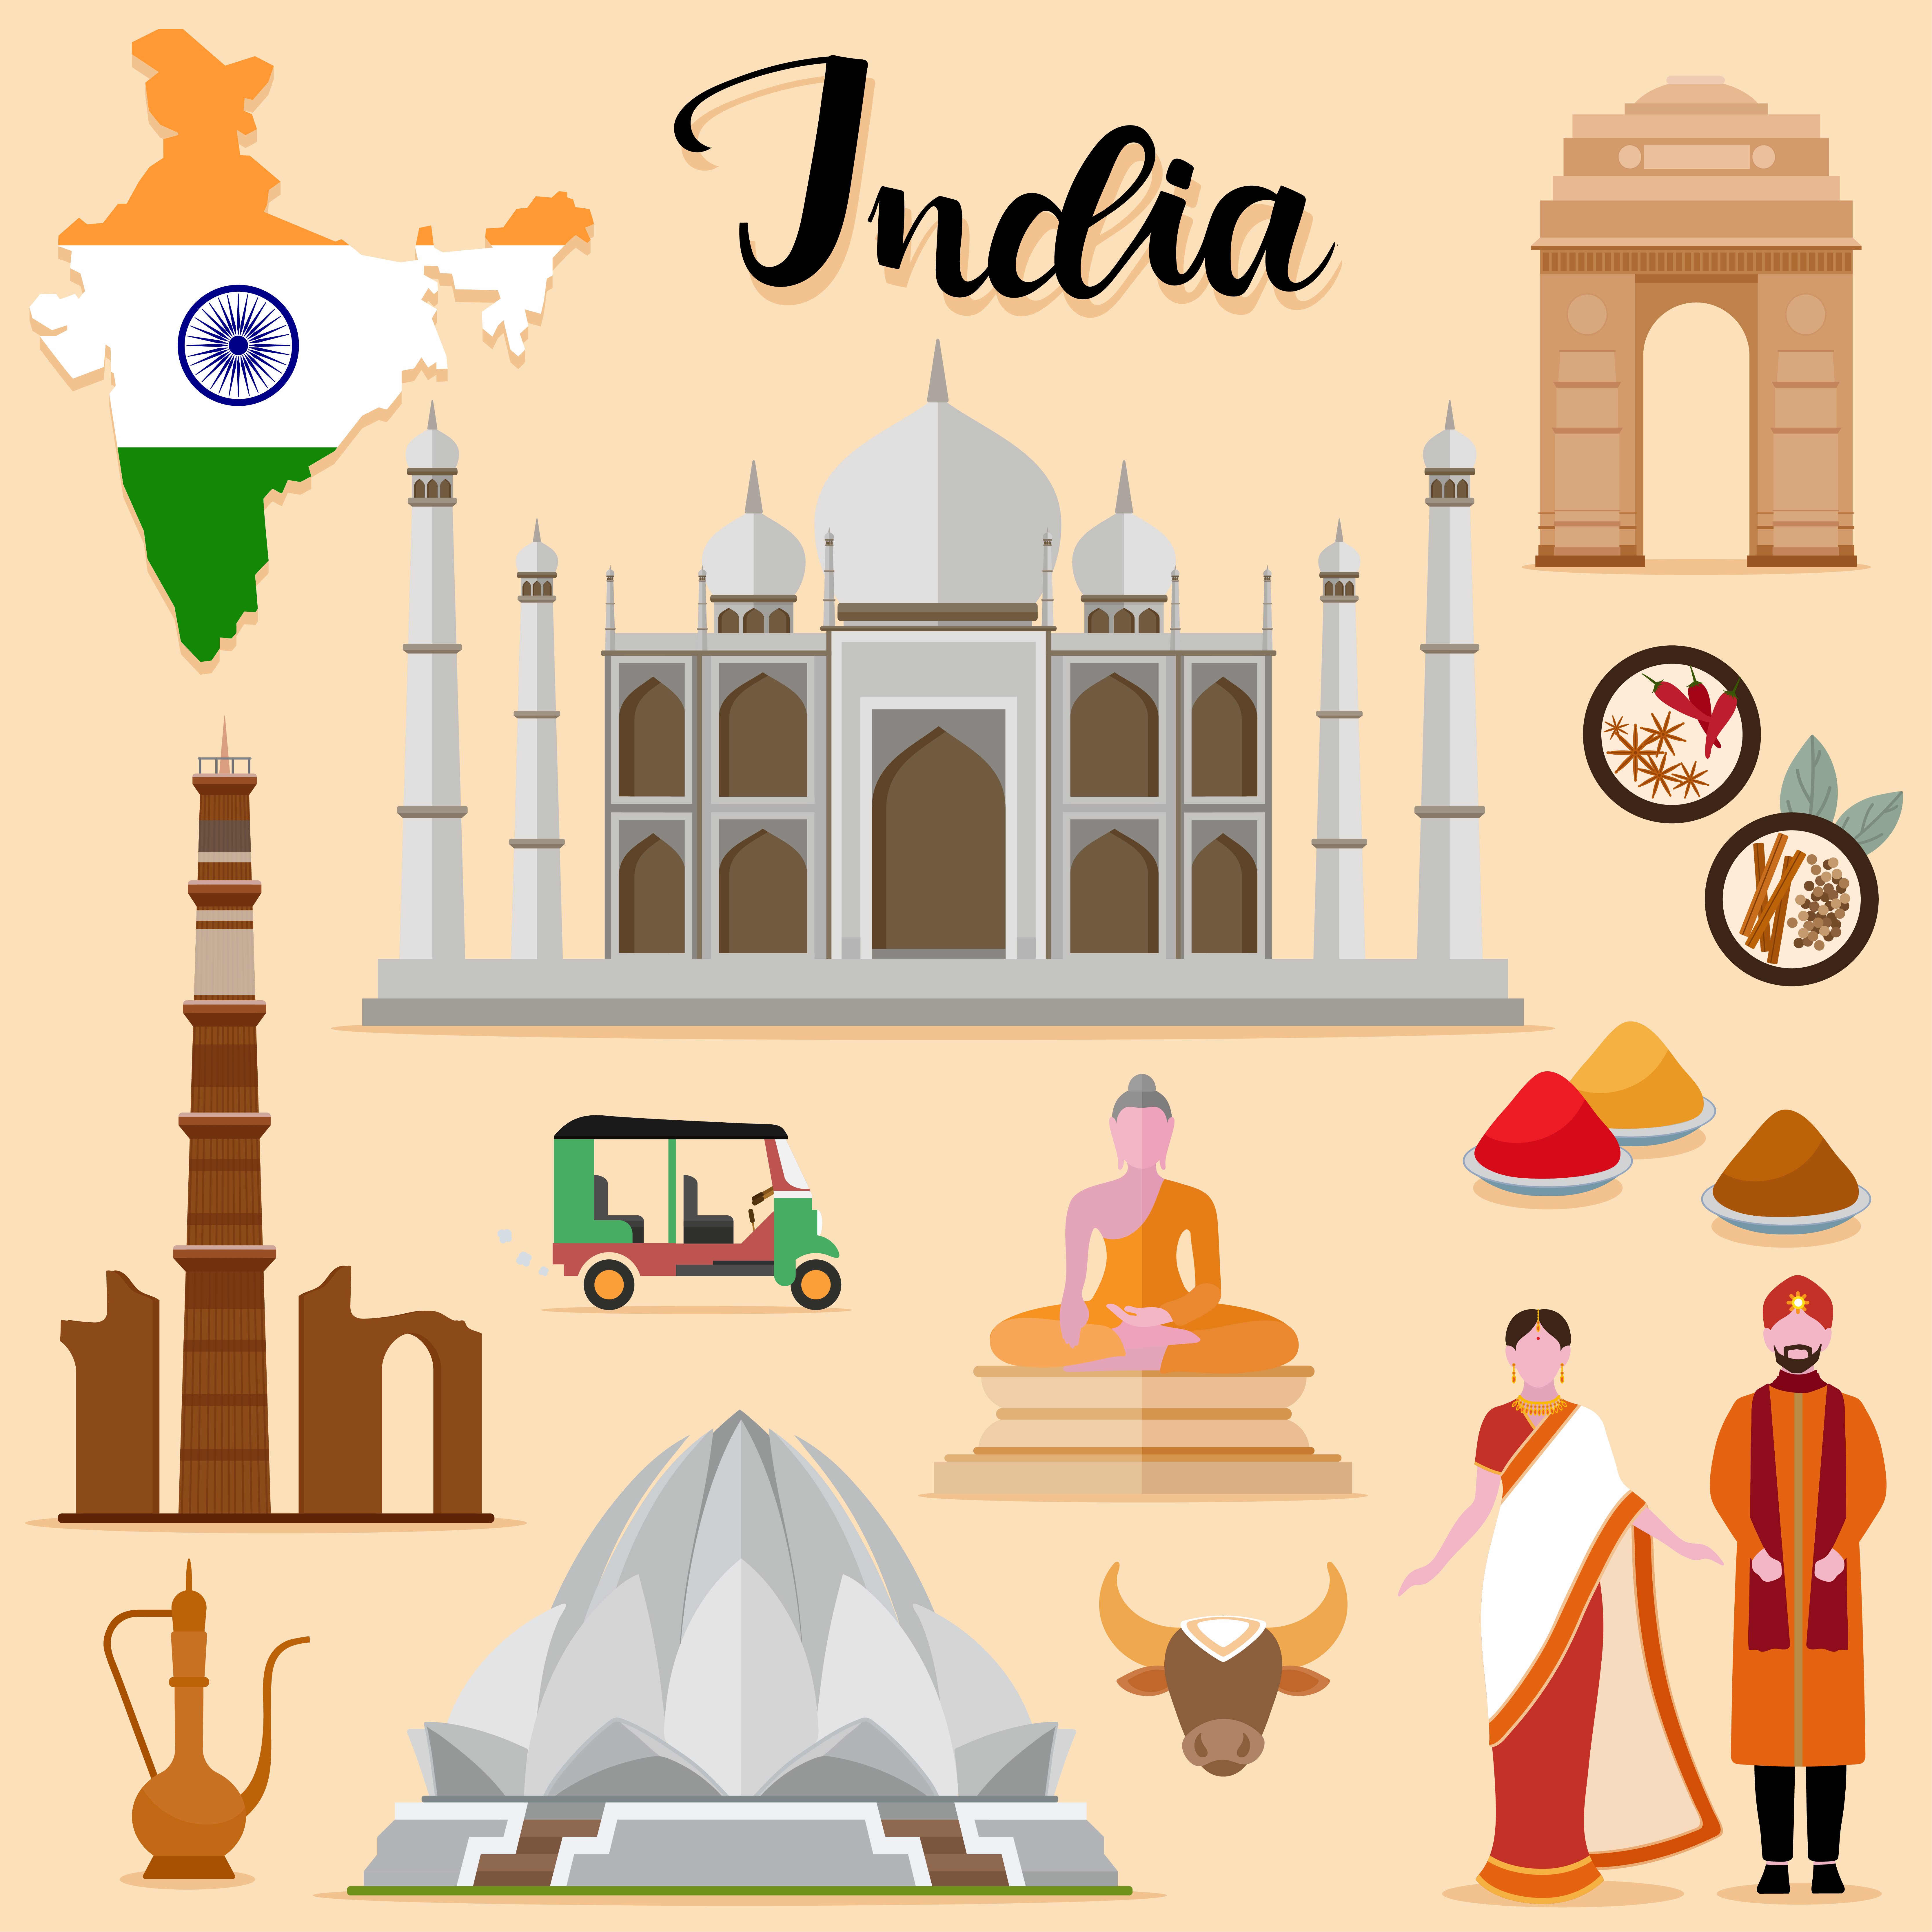 tourism in india clipart